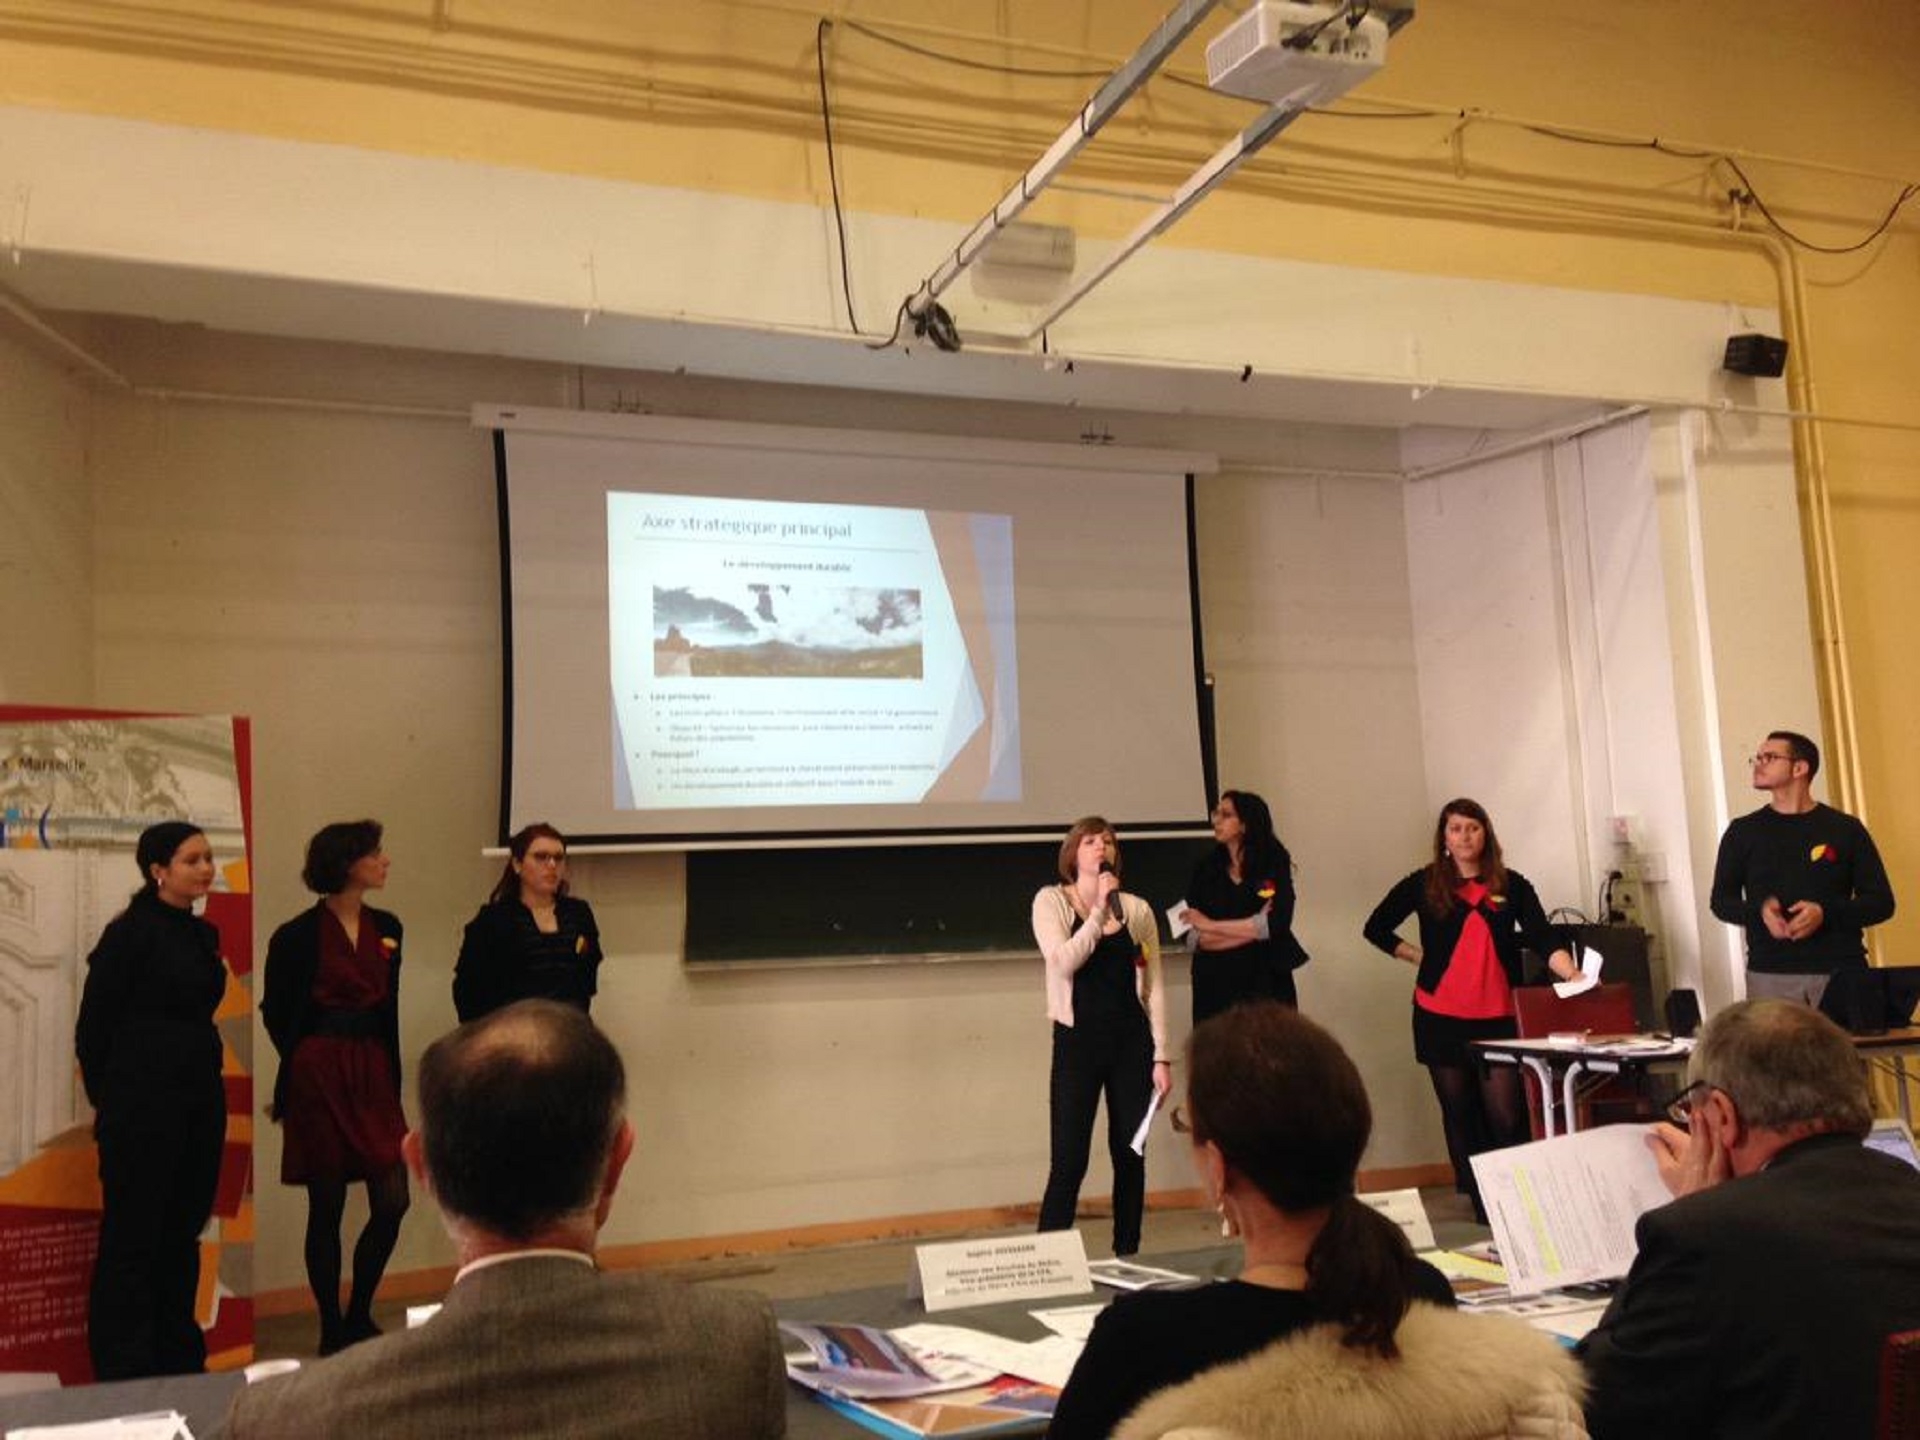 Students of Aix-en-Provence Institute defended dissertations devoted
to Nagorno-Karabakh